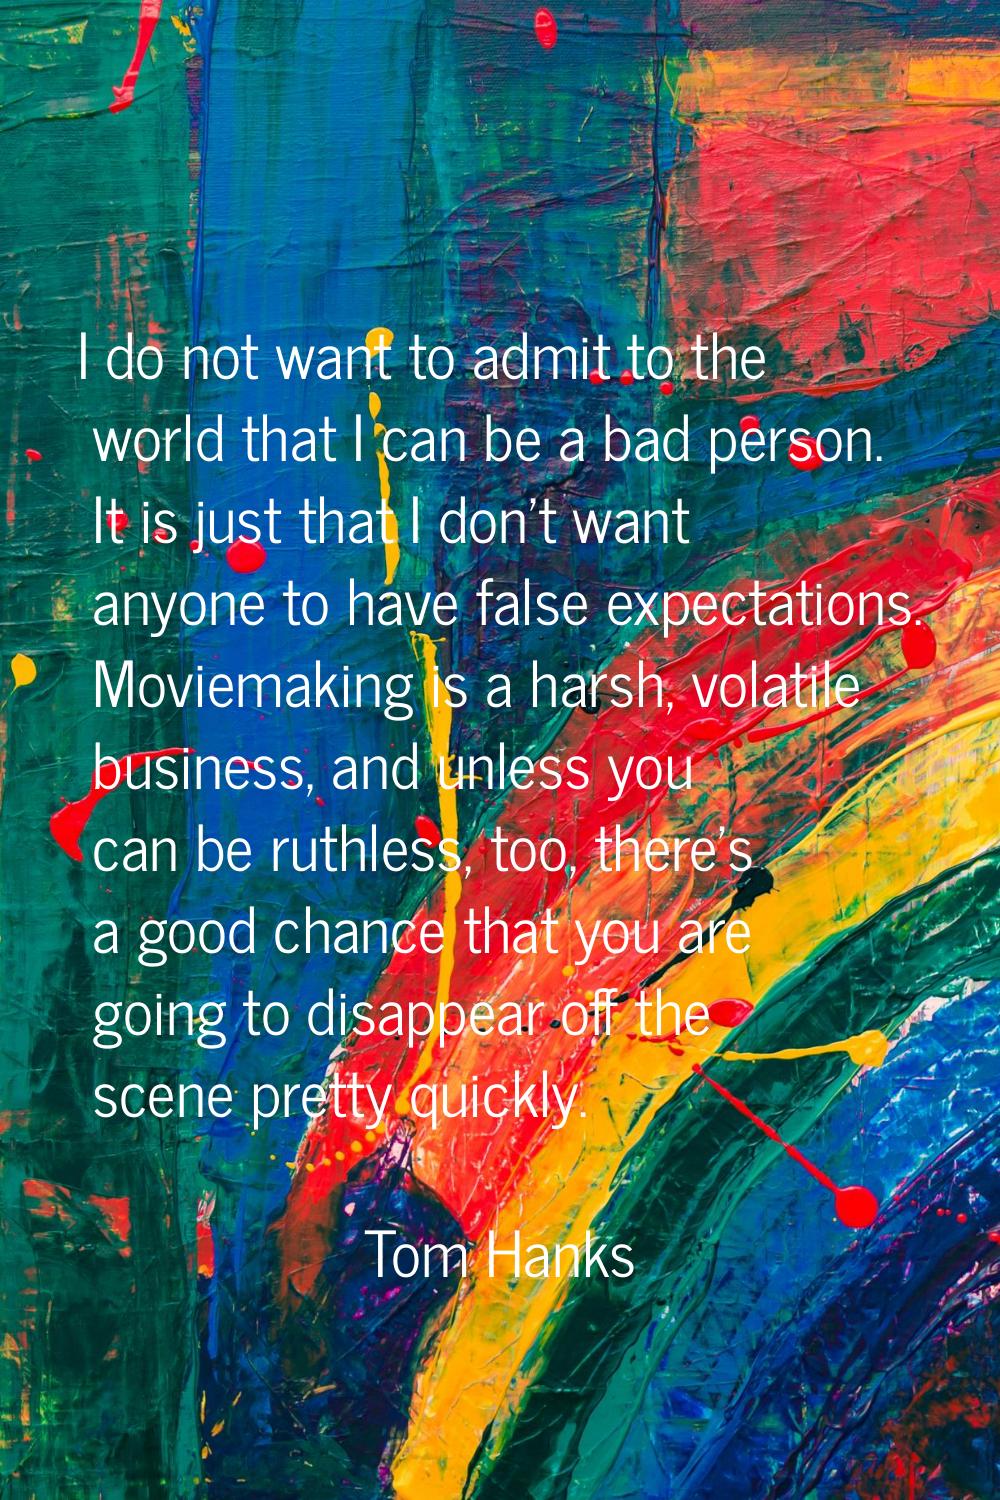 I do not want to admit to the world that I can be a bad person. It is just that I don't want anyone